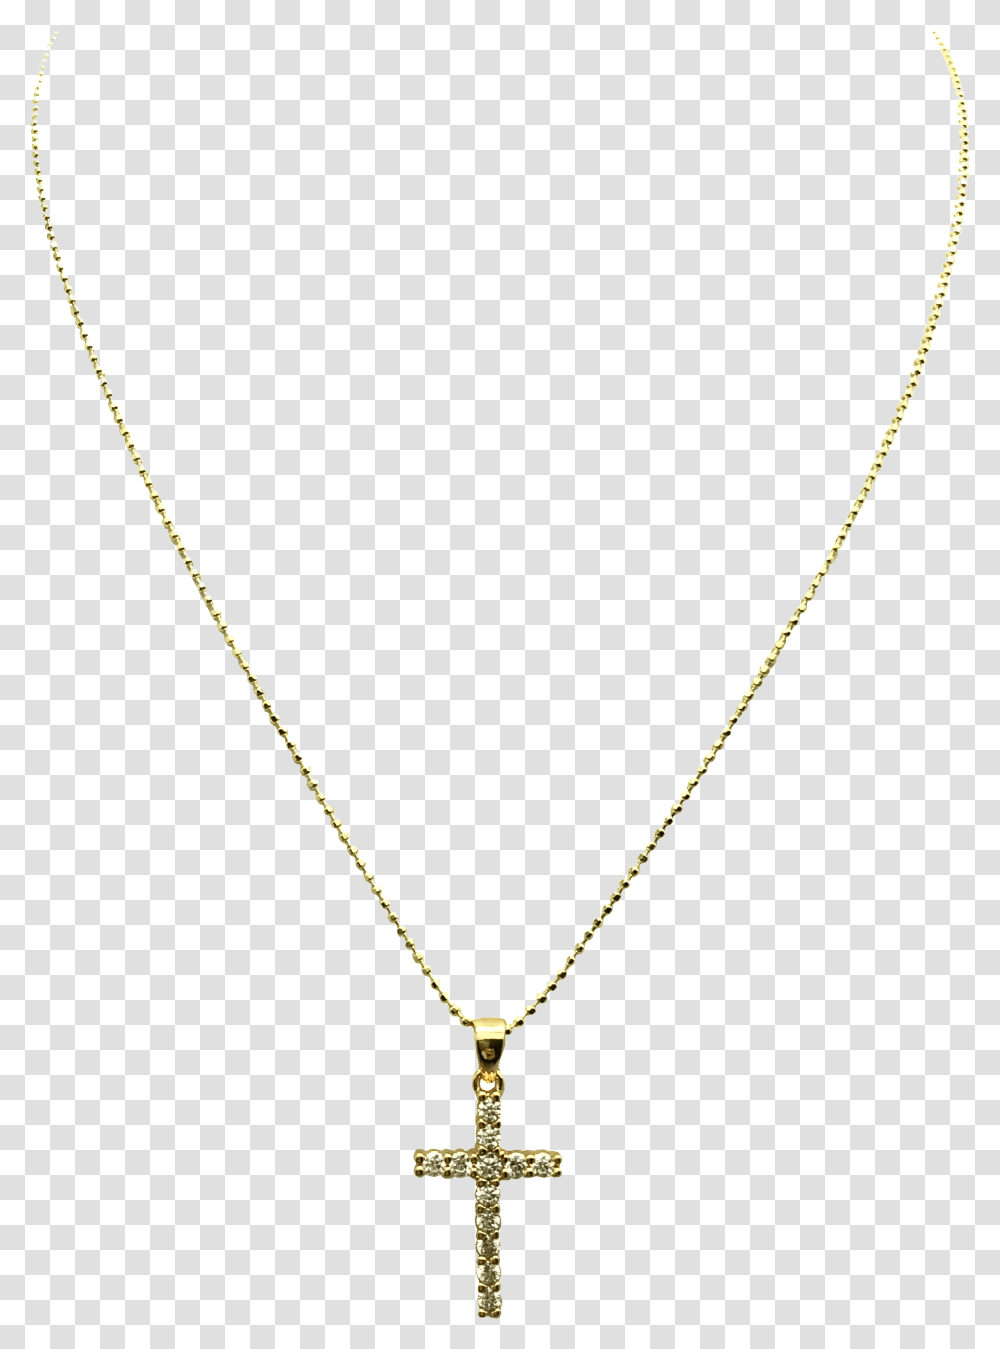 Cross Chain Gold Double Pearl Pendant Necklaces, Jewelry, Accessories, Accessory, Diamond Transparent Png